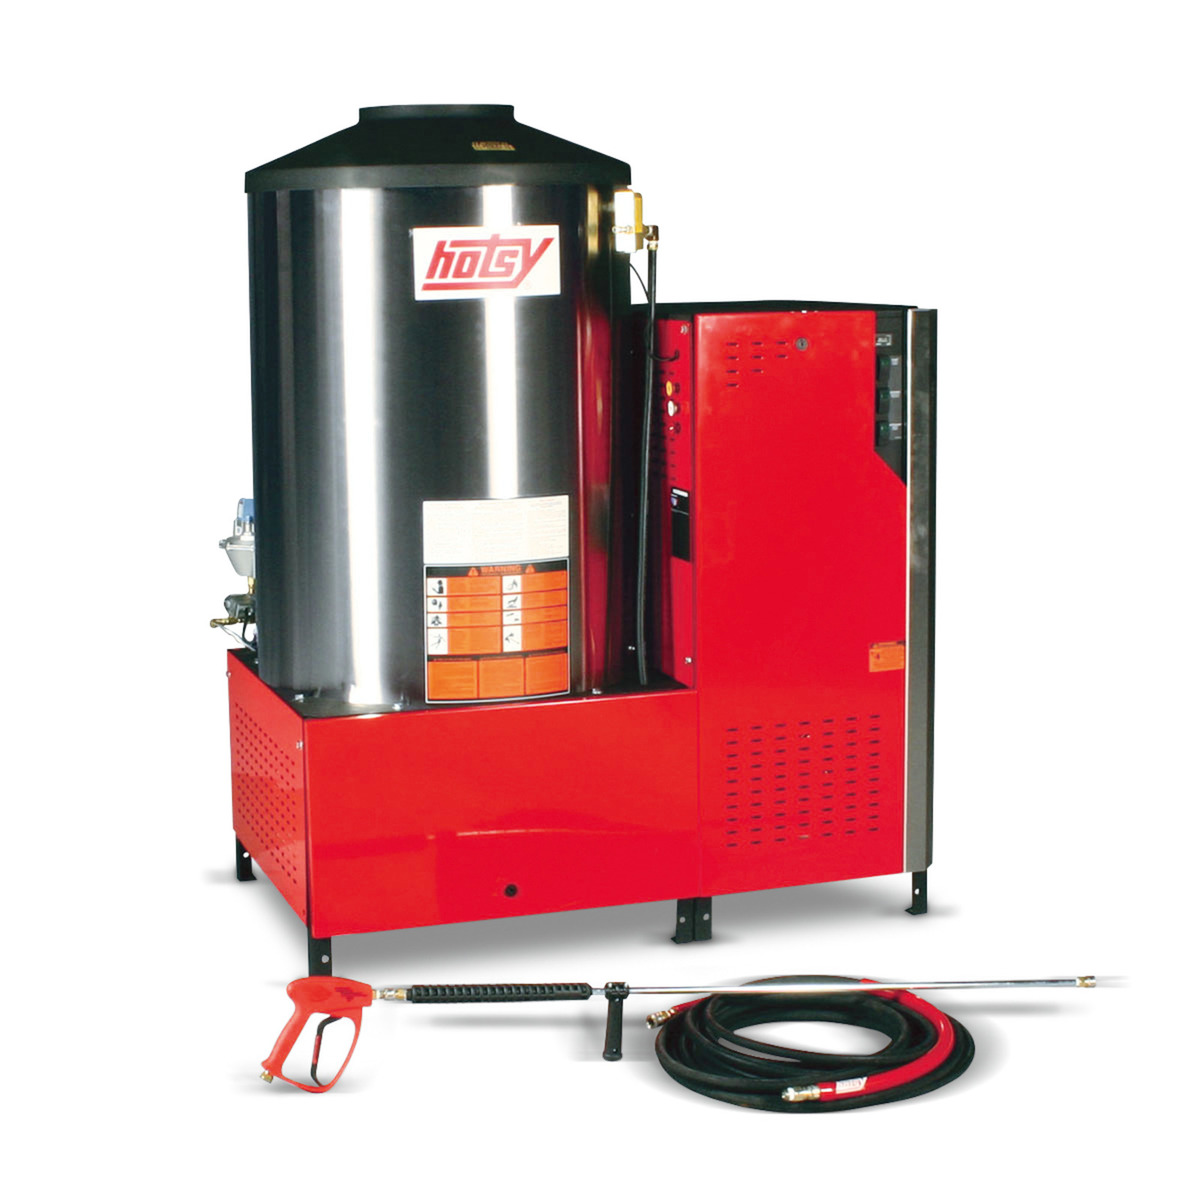 Hotsy 5700 – 5800 Series – Stationary Electric Hot Water Pressure Washers